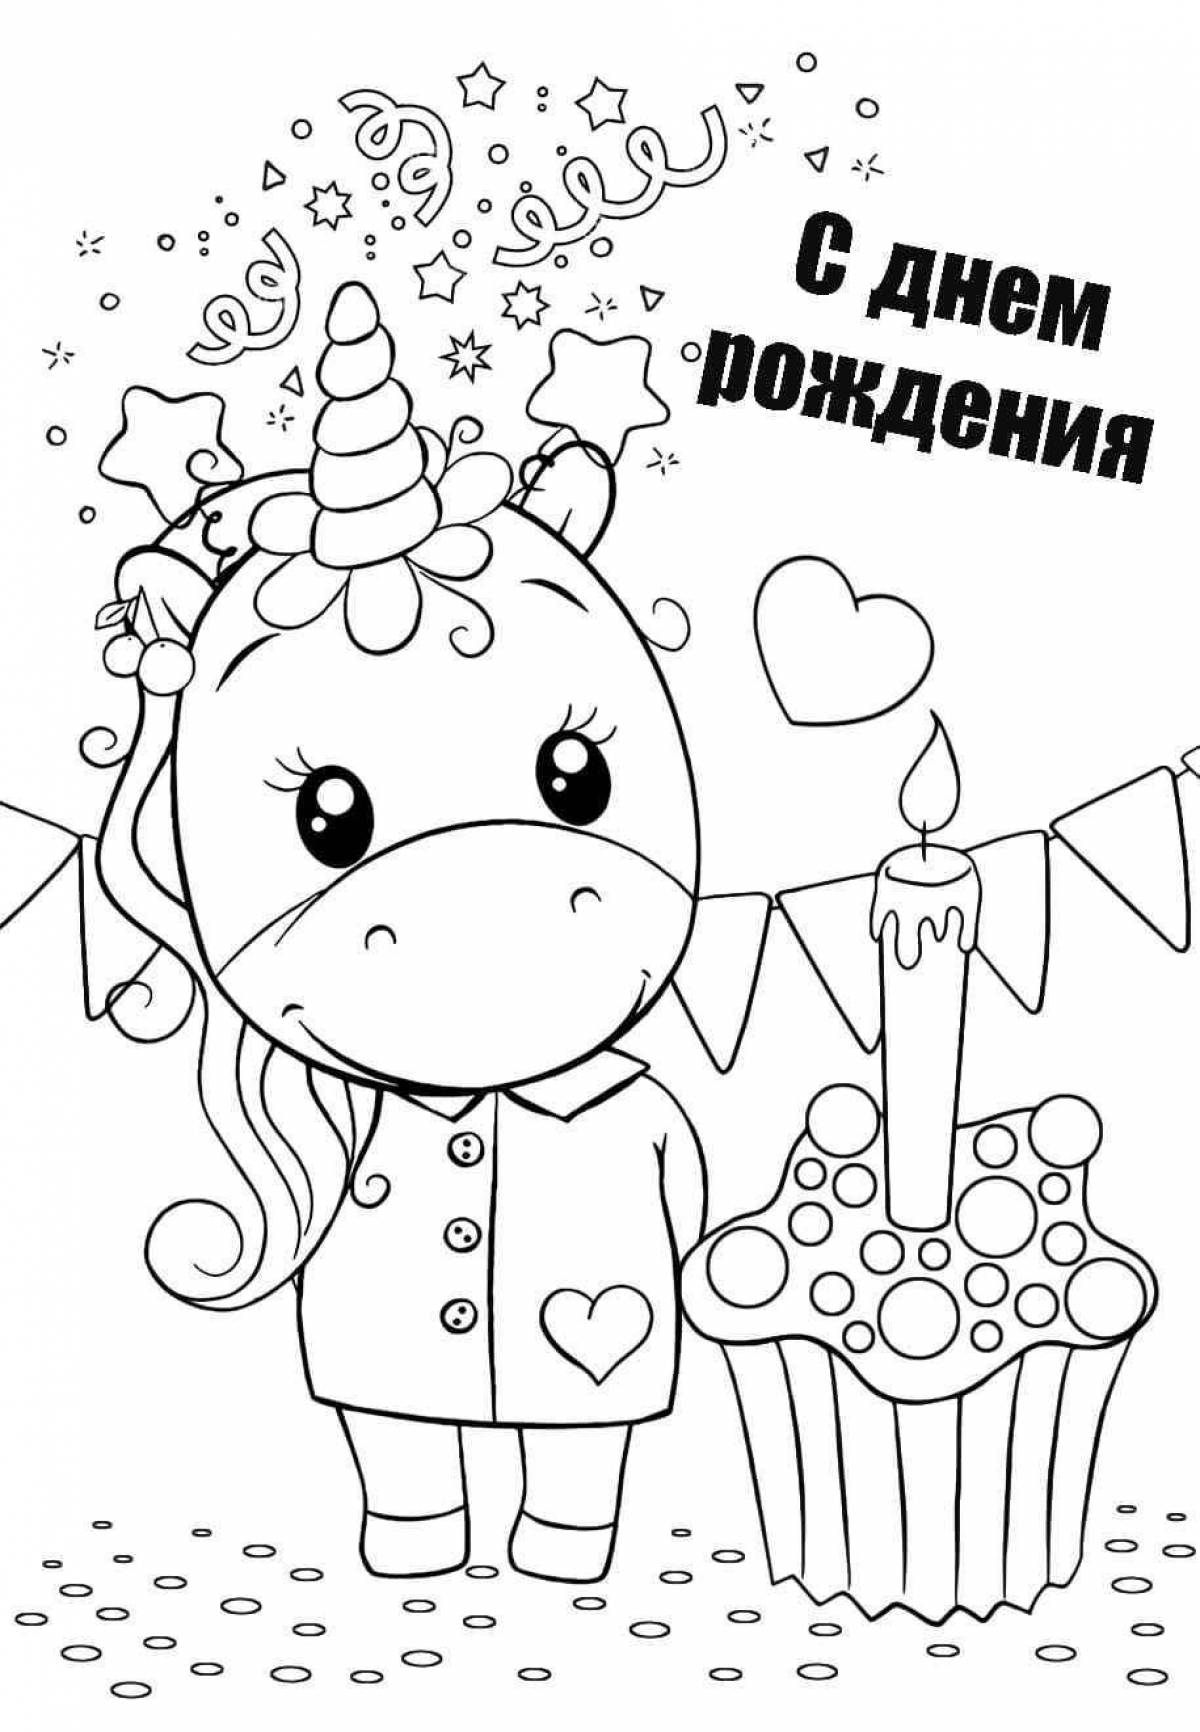 Colorful little sister's birthday coloring page